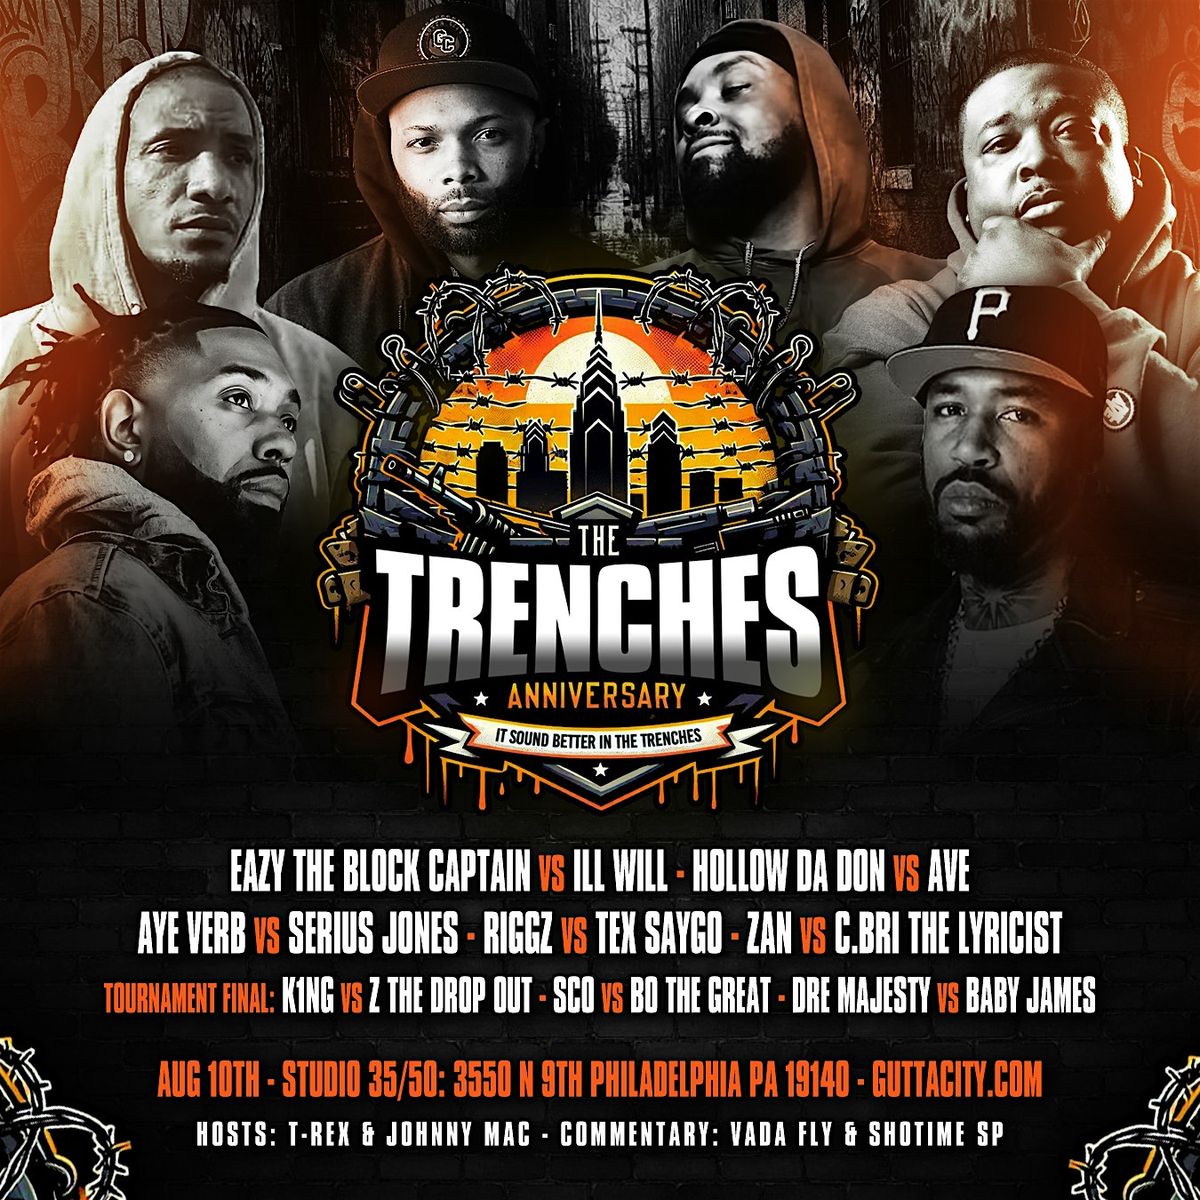 The Trenches Anniversary - It Sound Better In The Trenches